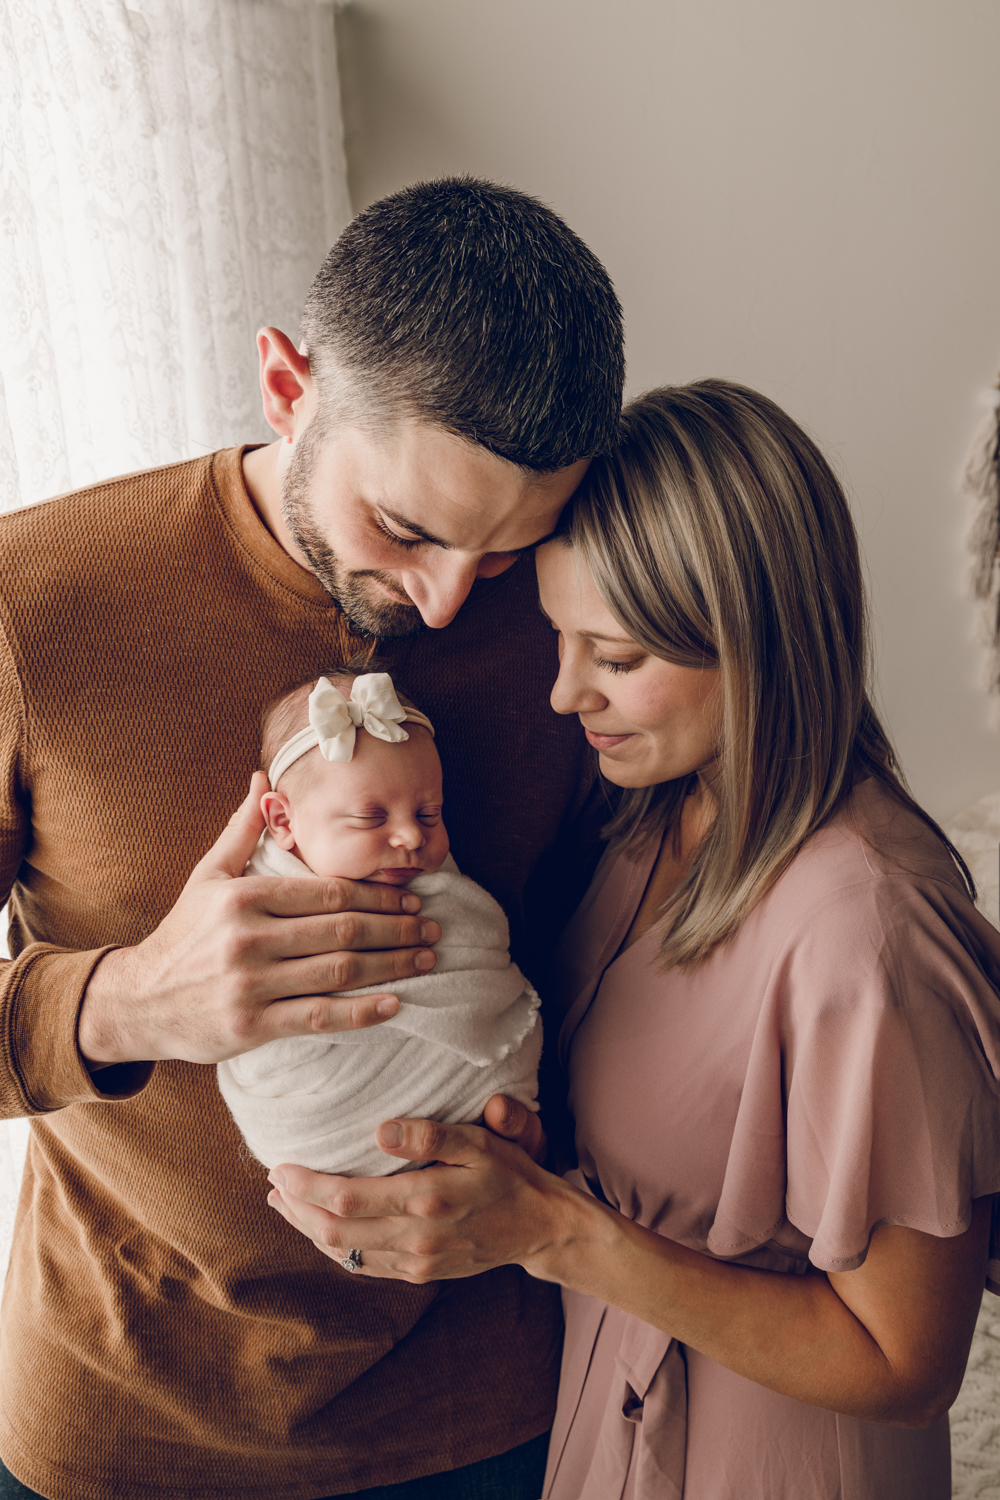 Beautiful family photo with mom dad and newborn baby. Helps clients see example of my photography sessions.